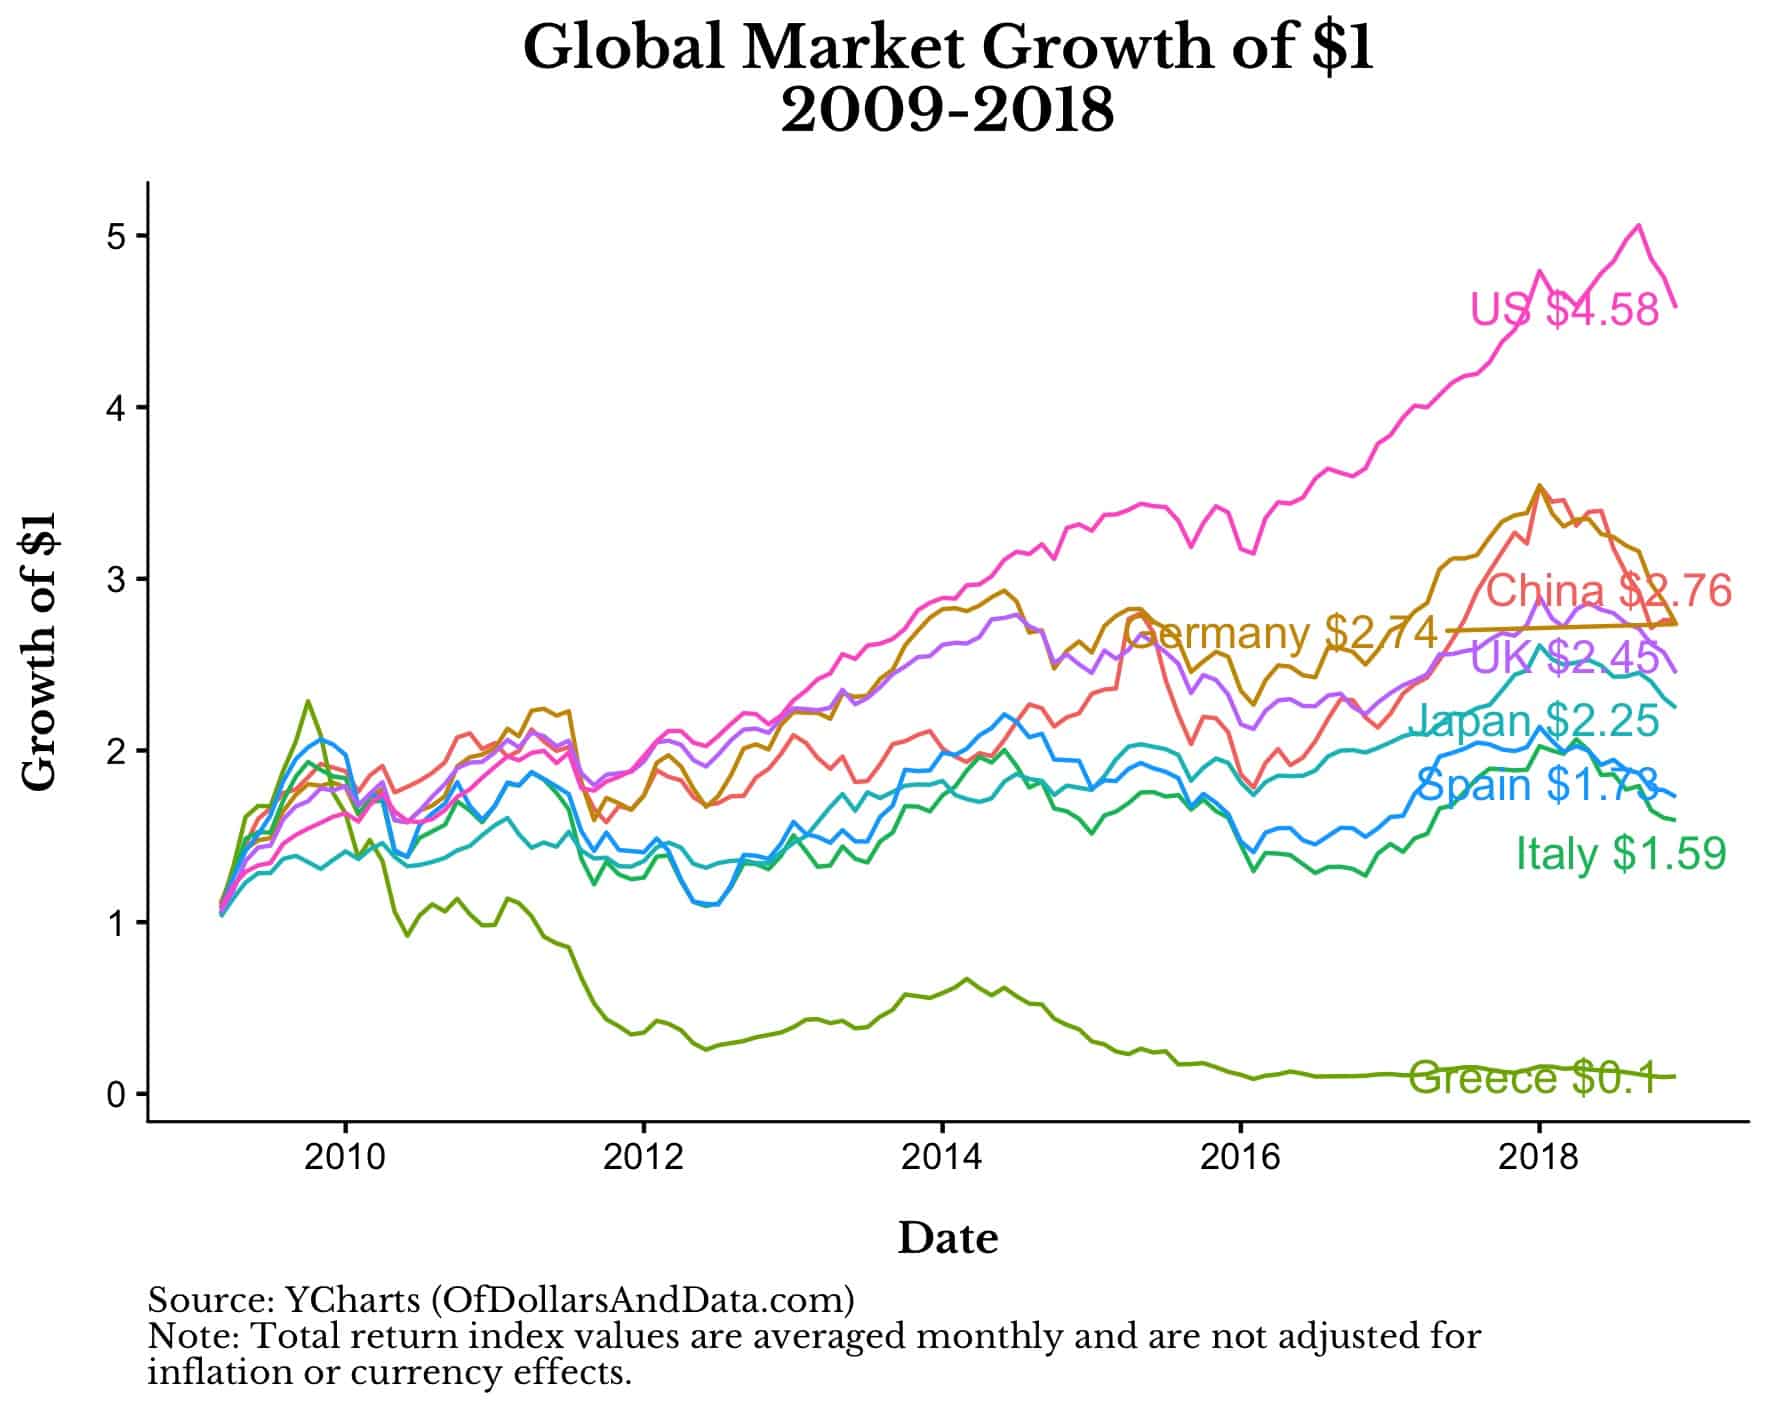 Global market growth of $1 from 2009 to 2018 for various countries.